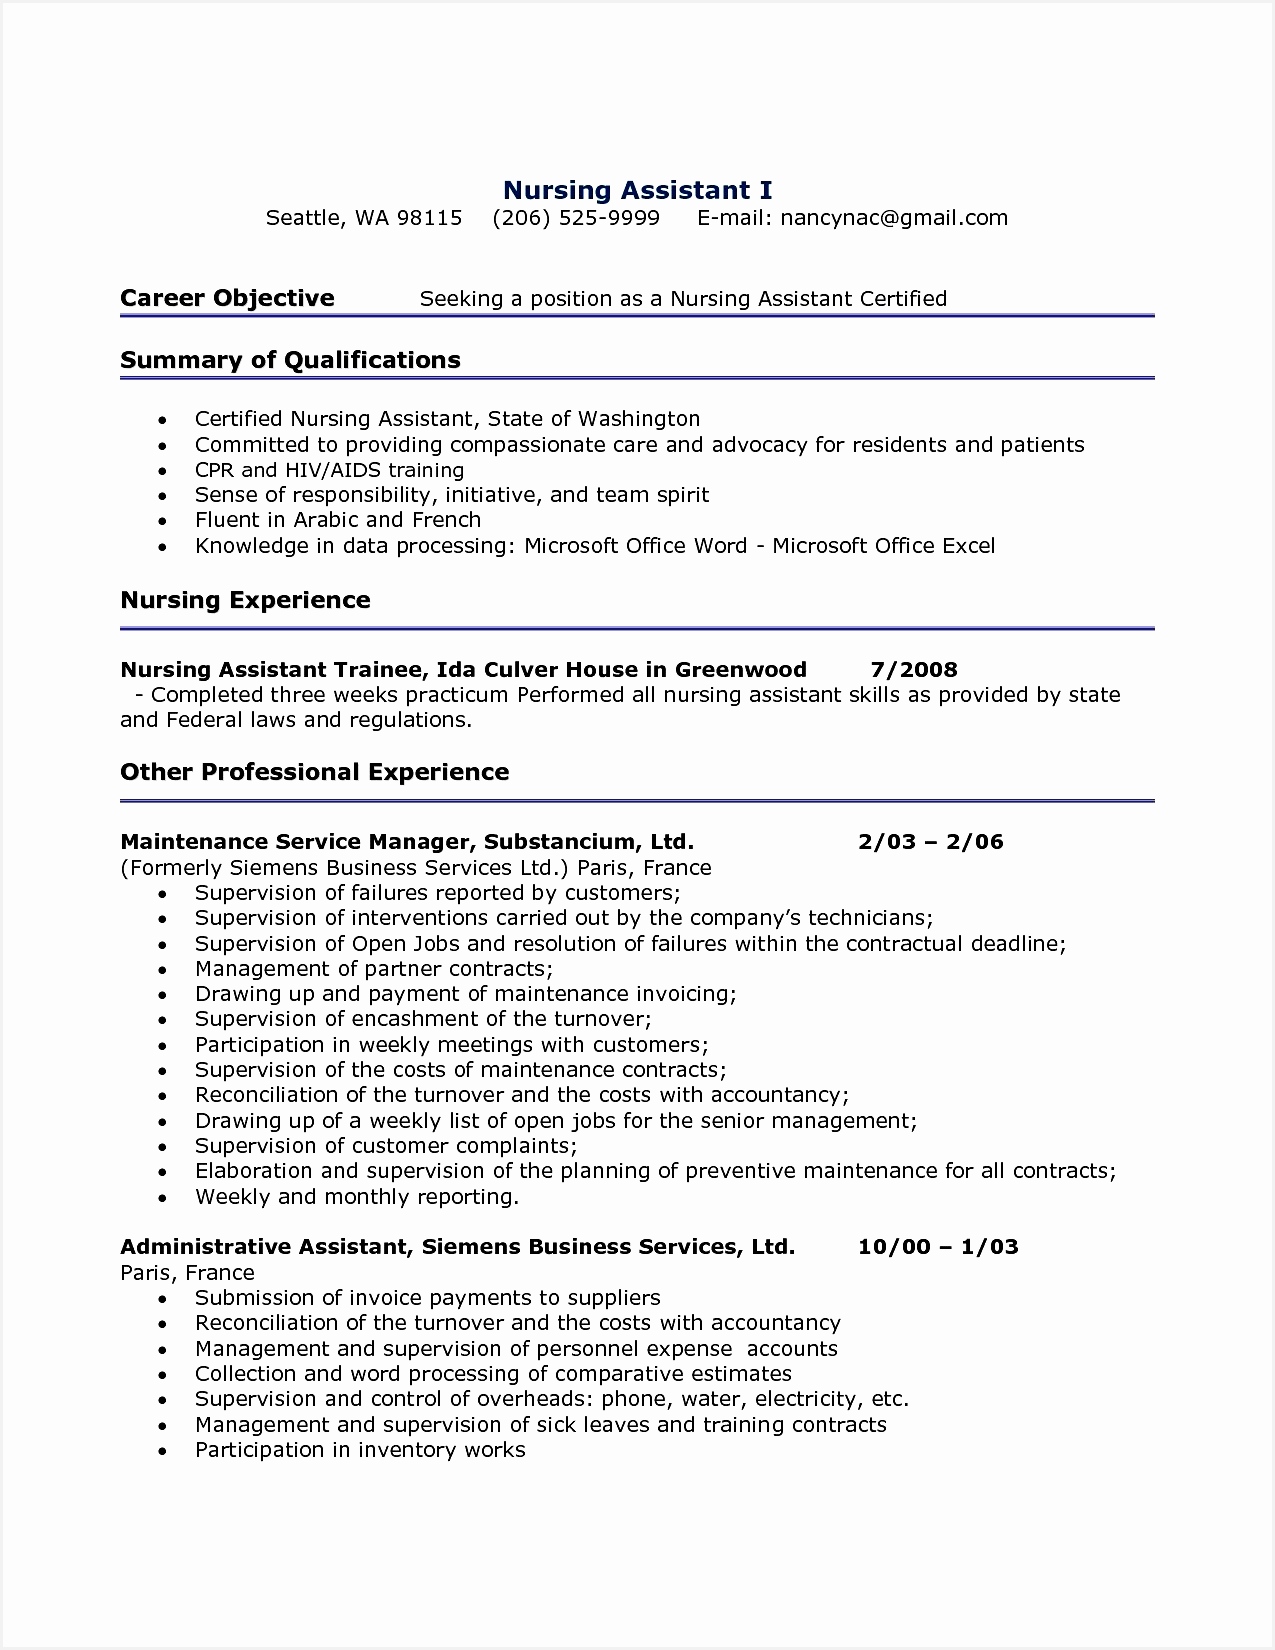 Awesome Resume Examples for Sales 12 Beautiful Resume format for Nursing Sample Resume format Unique16501275